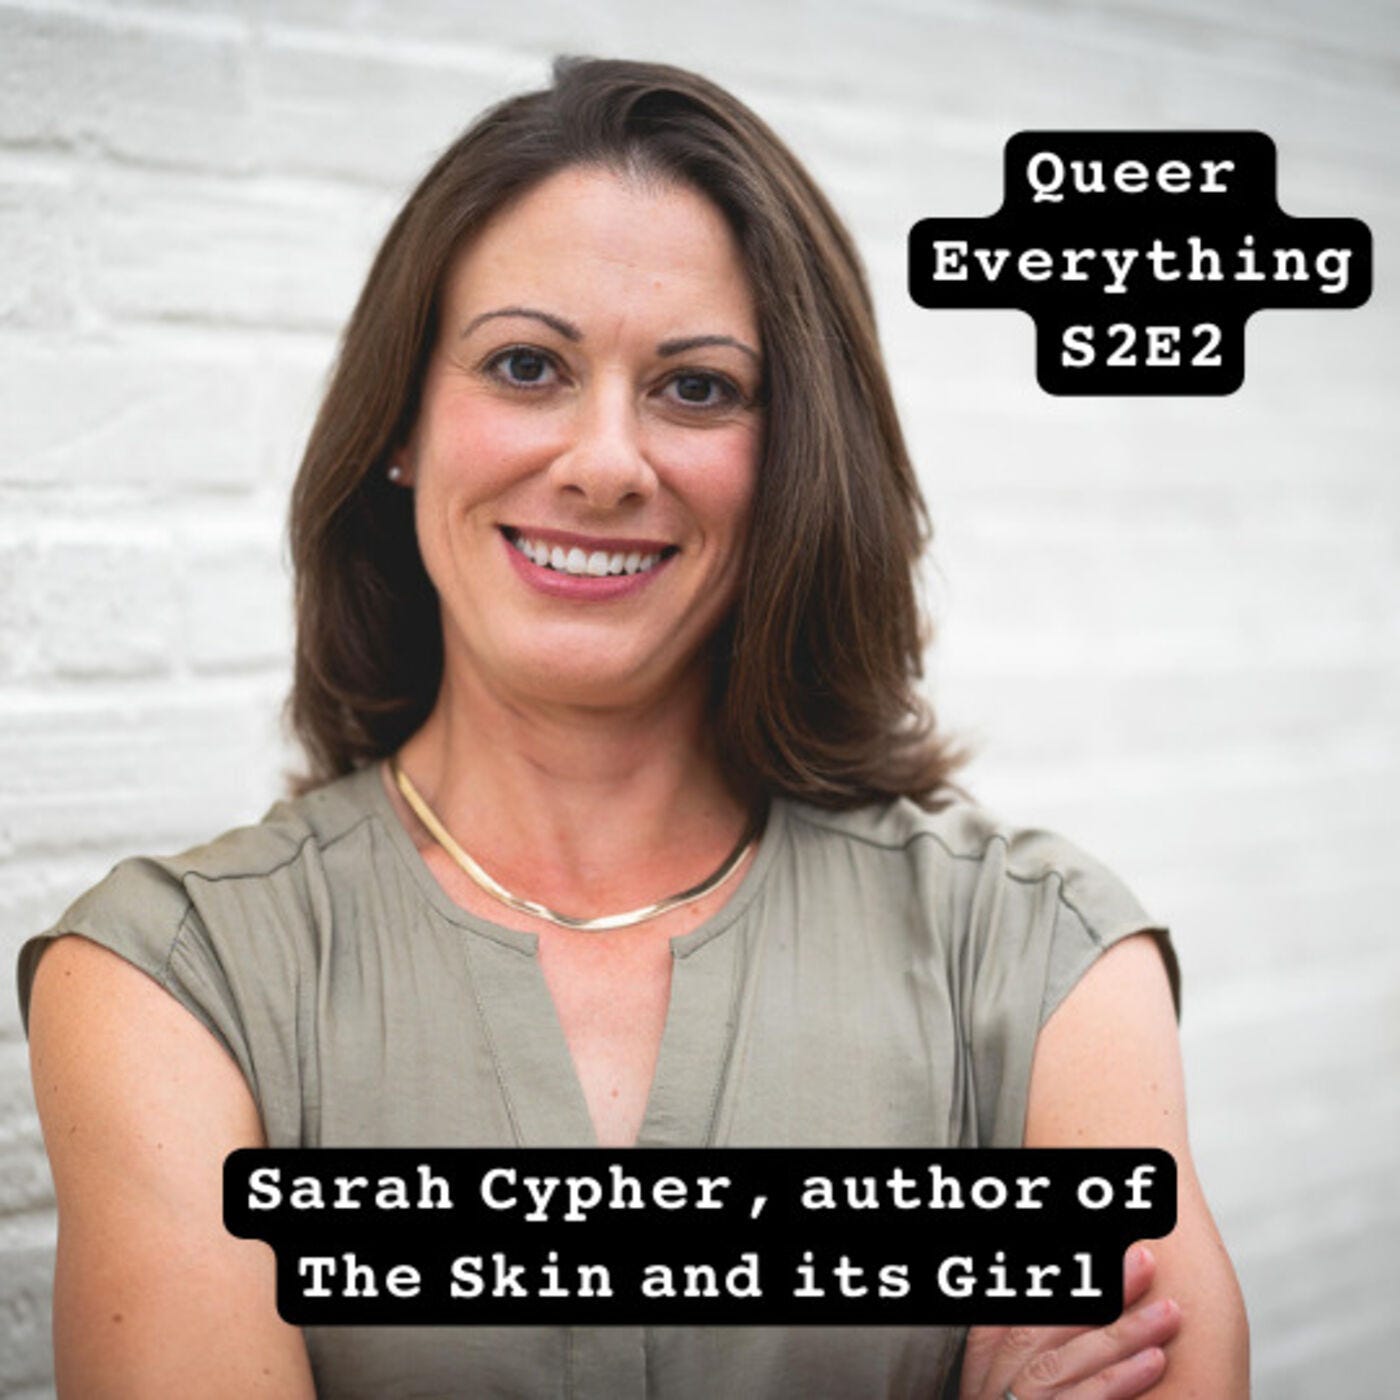 Sarah Cypher, author of The Skin and its Girl